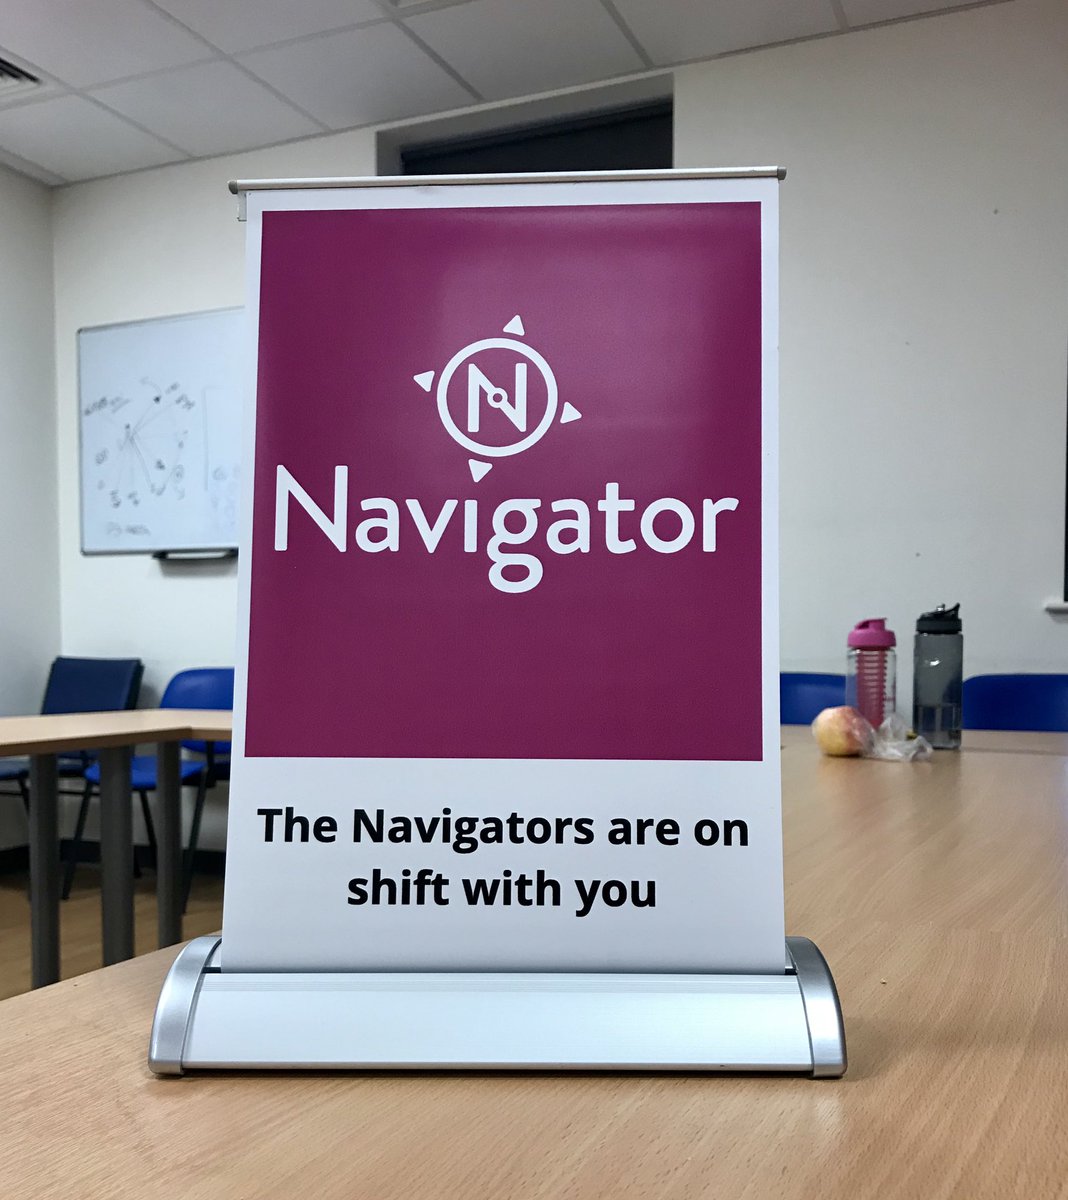 Our @NavigatorsScot Delma delivered a workshop today at the @NHS_Education Practice Managers learning event at @JubileeHospital about the work our Navigators do. Thank you for having us!